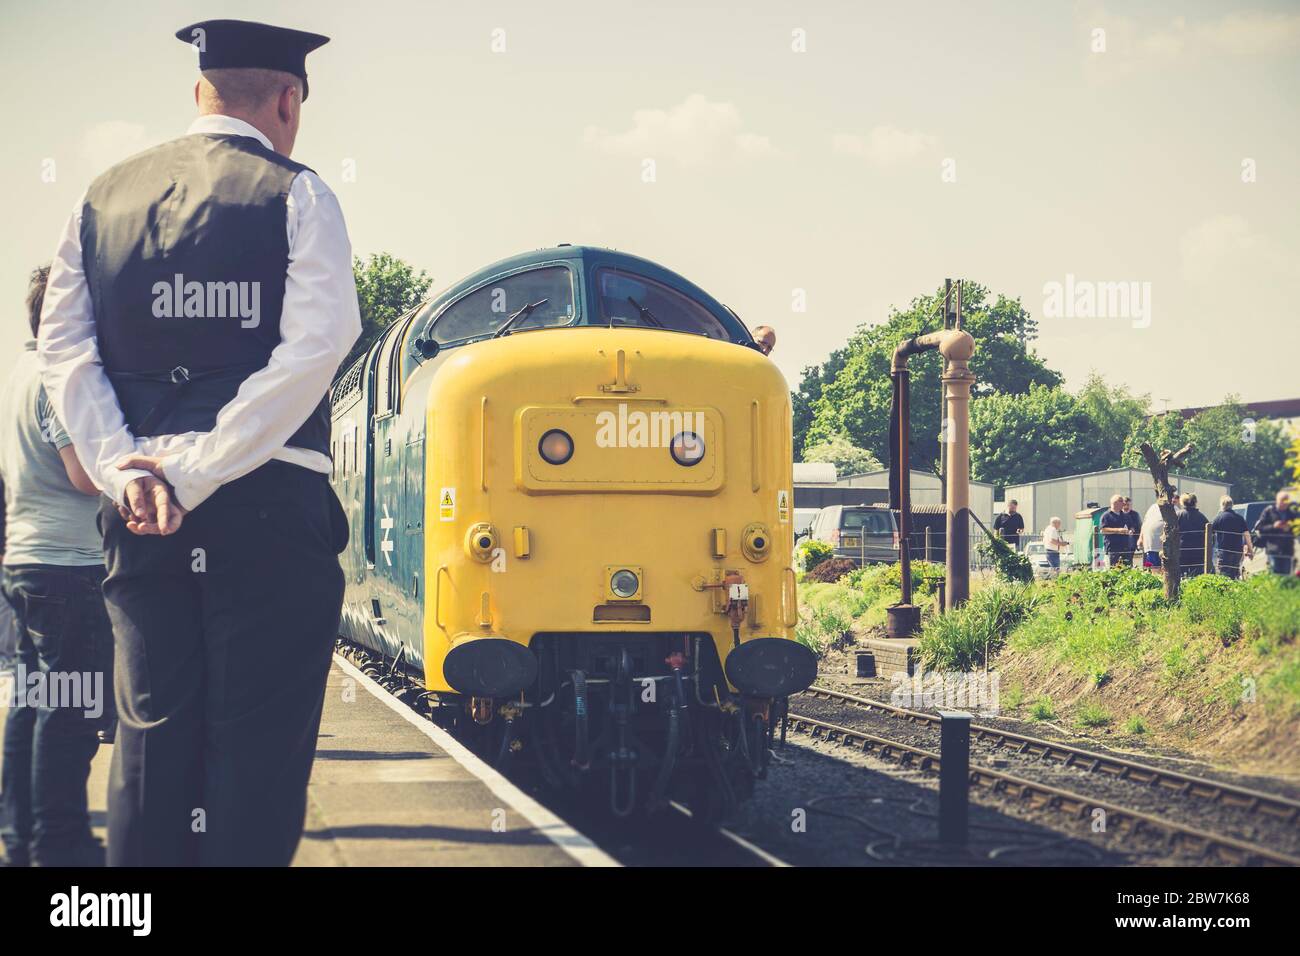 Close up of vintage diesel locomotive 55019 Royal Highland Fusilier, Class 55, being admired by railway worker on platform, Severn Valley Railway, UK. Stock Photo